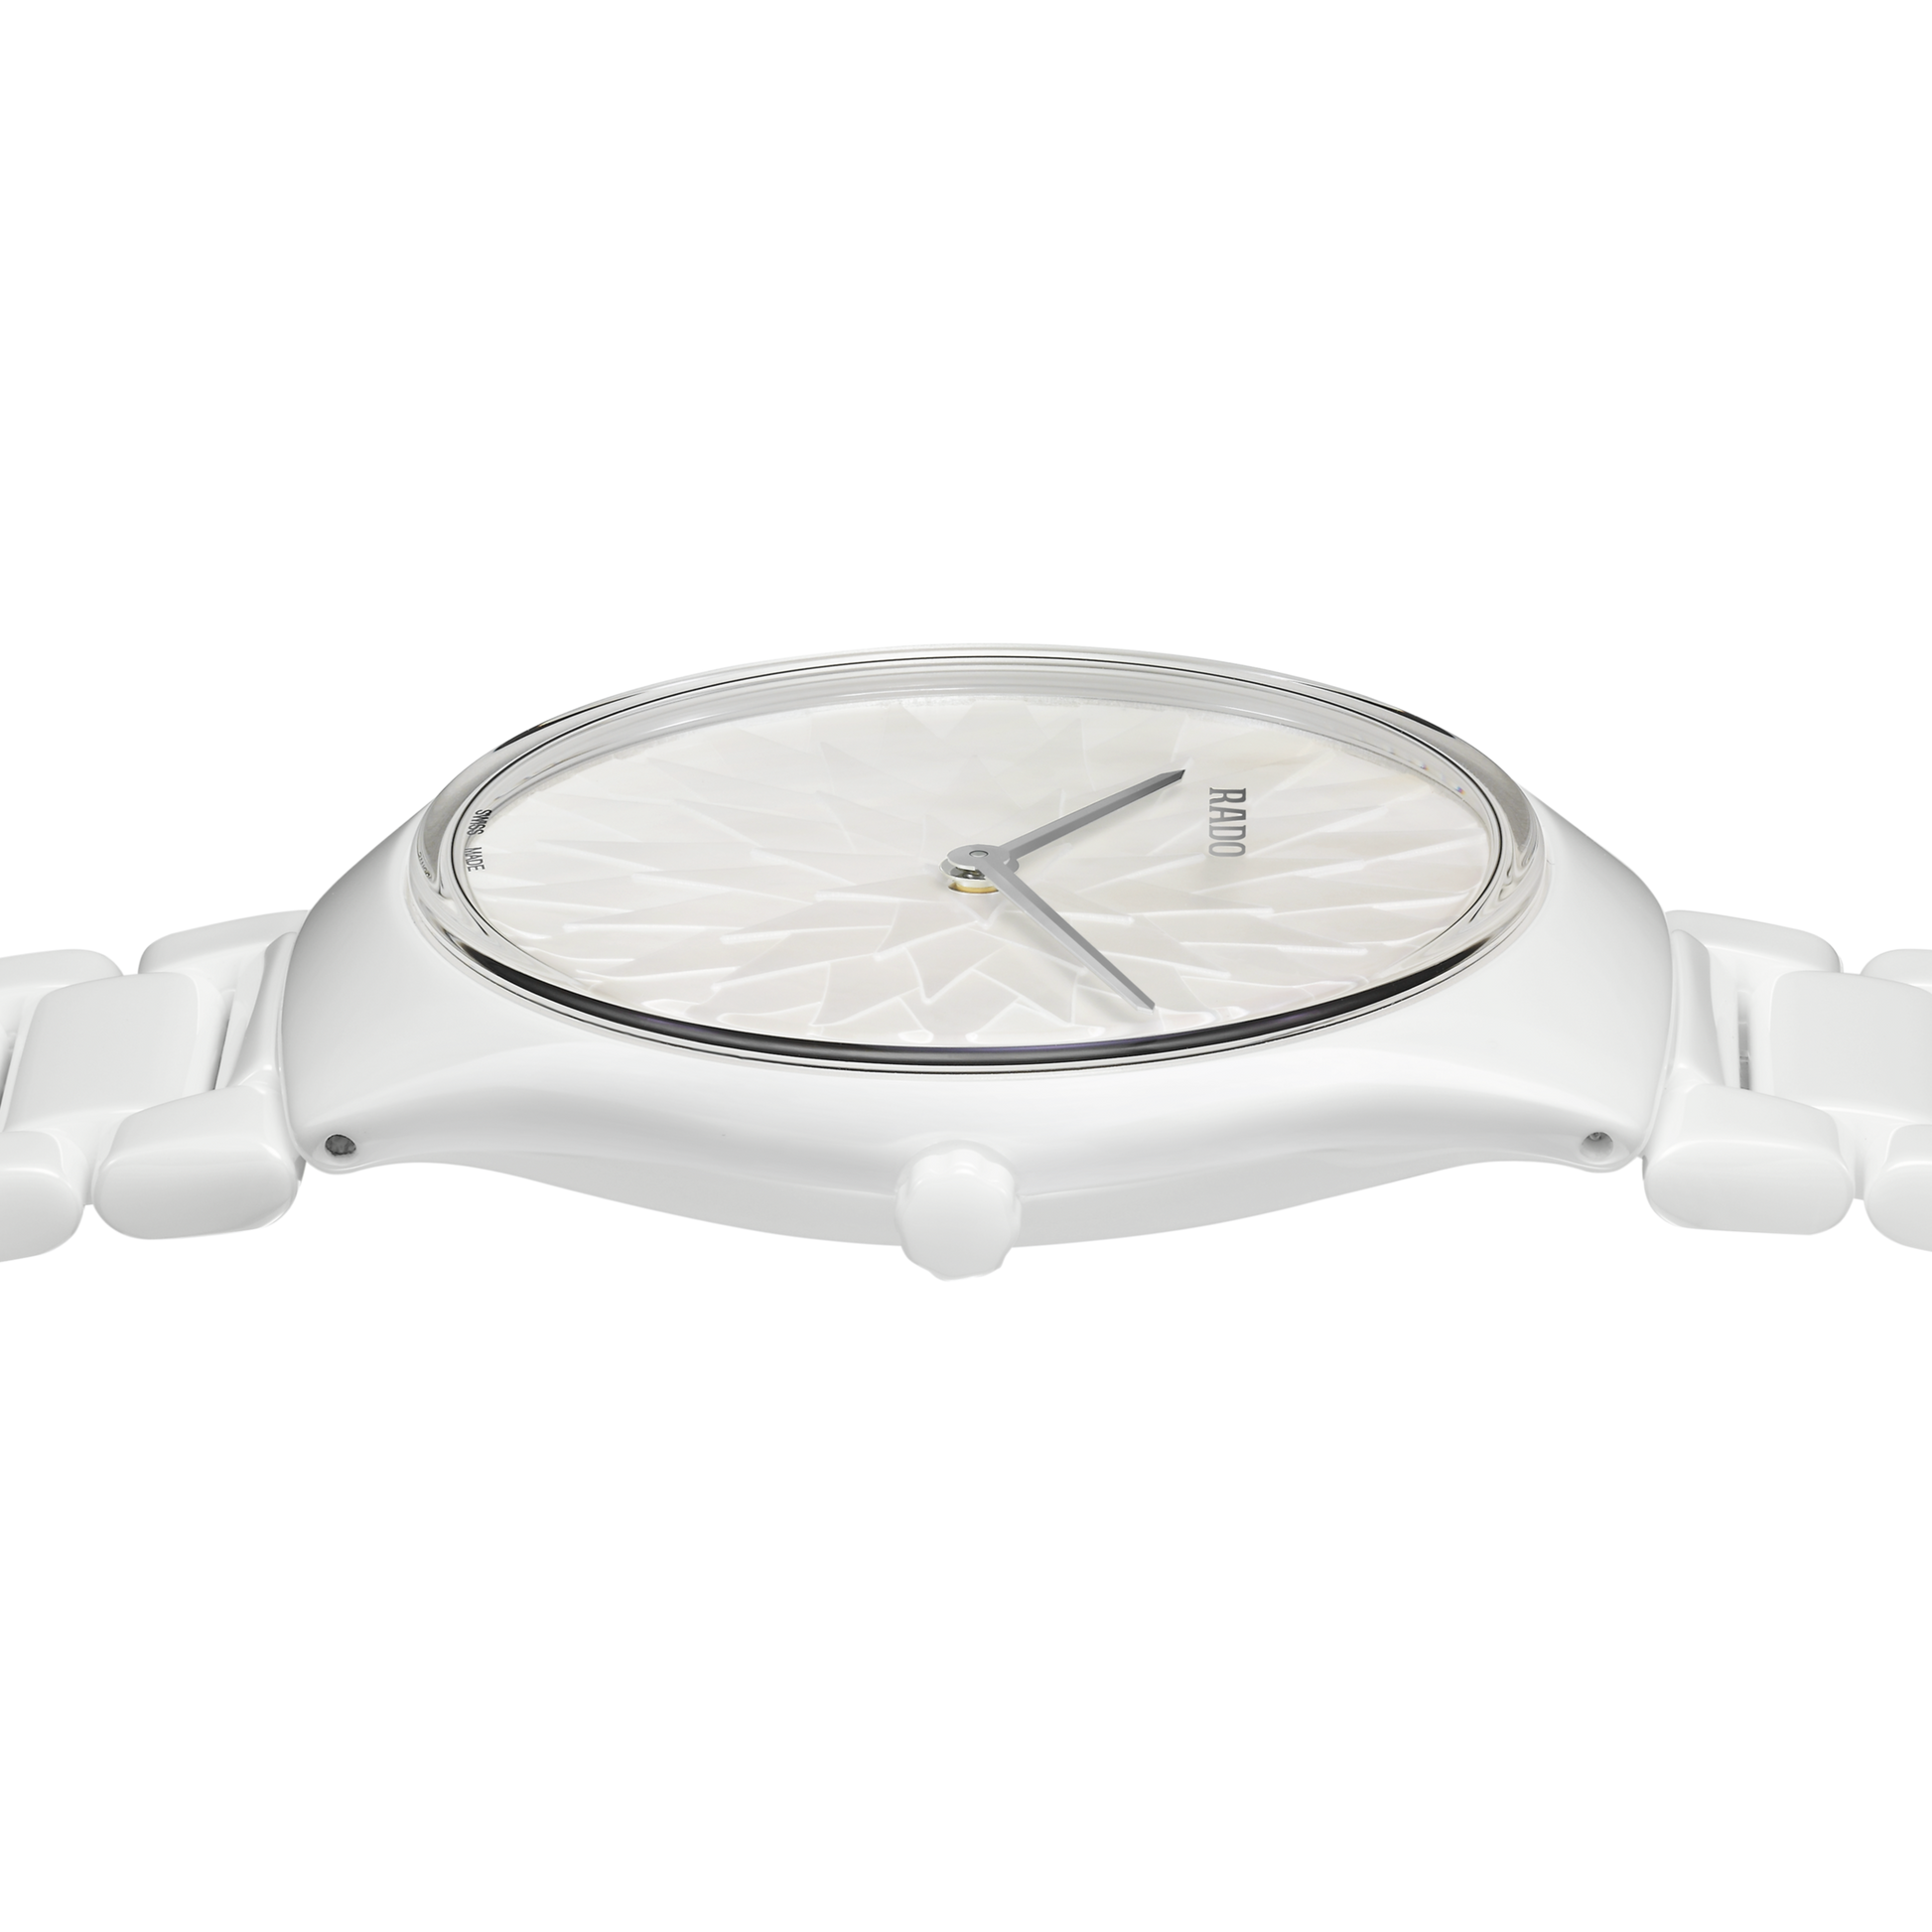 True Thinline X Automatic White Stainless Steel